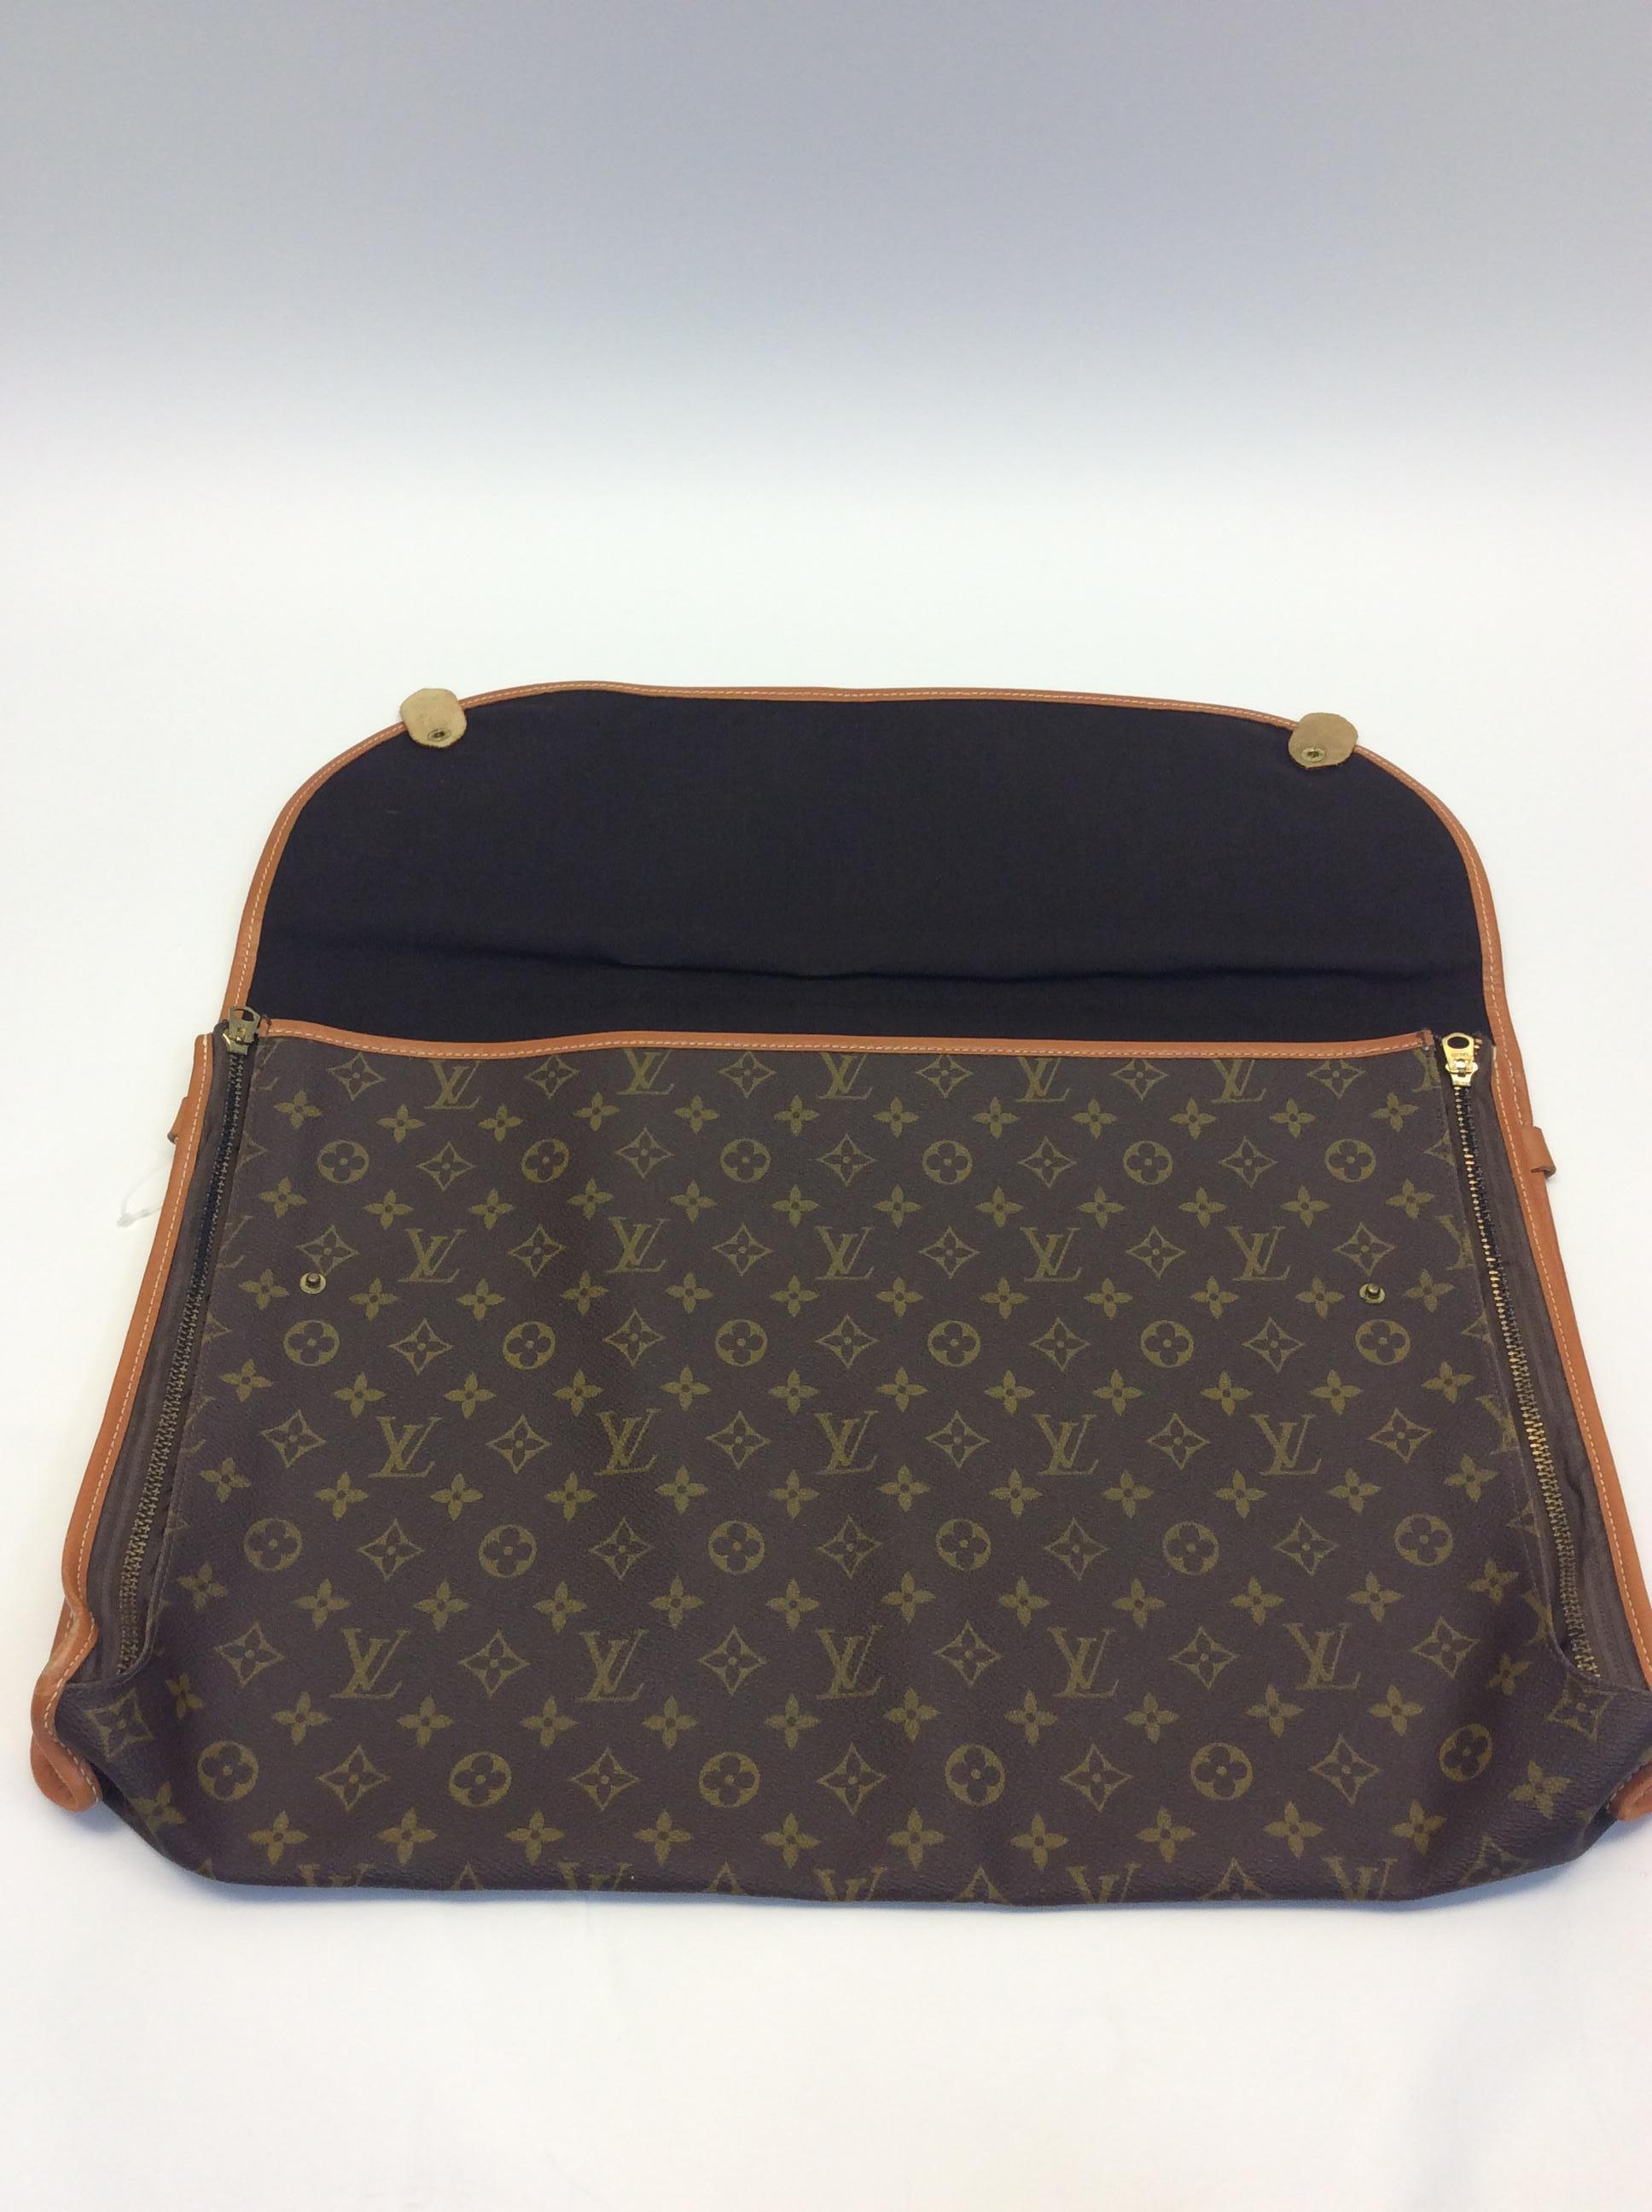 Louis Vuitton Medium Luggage Insert In Good Condition For Sale In Narberth, PA